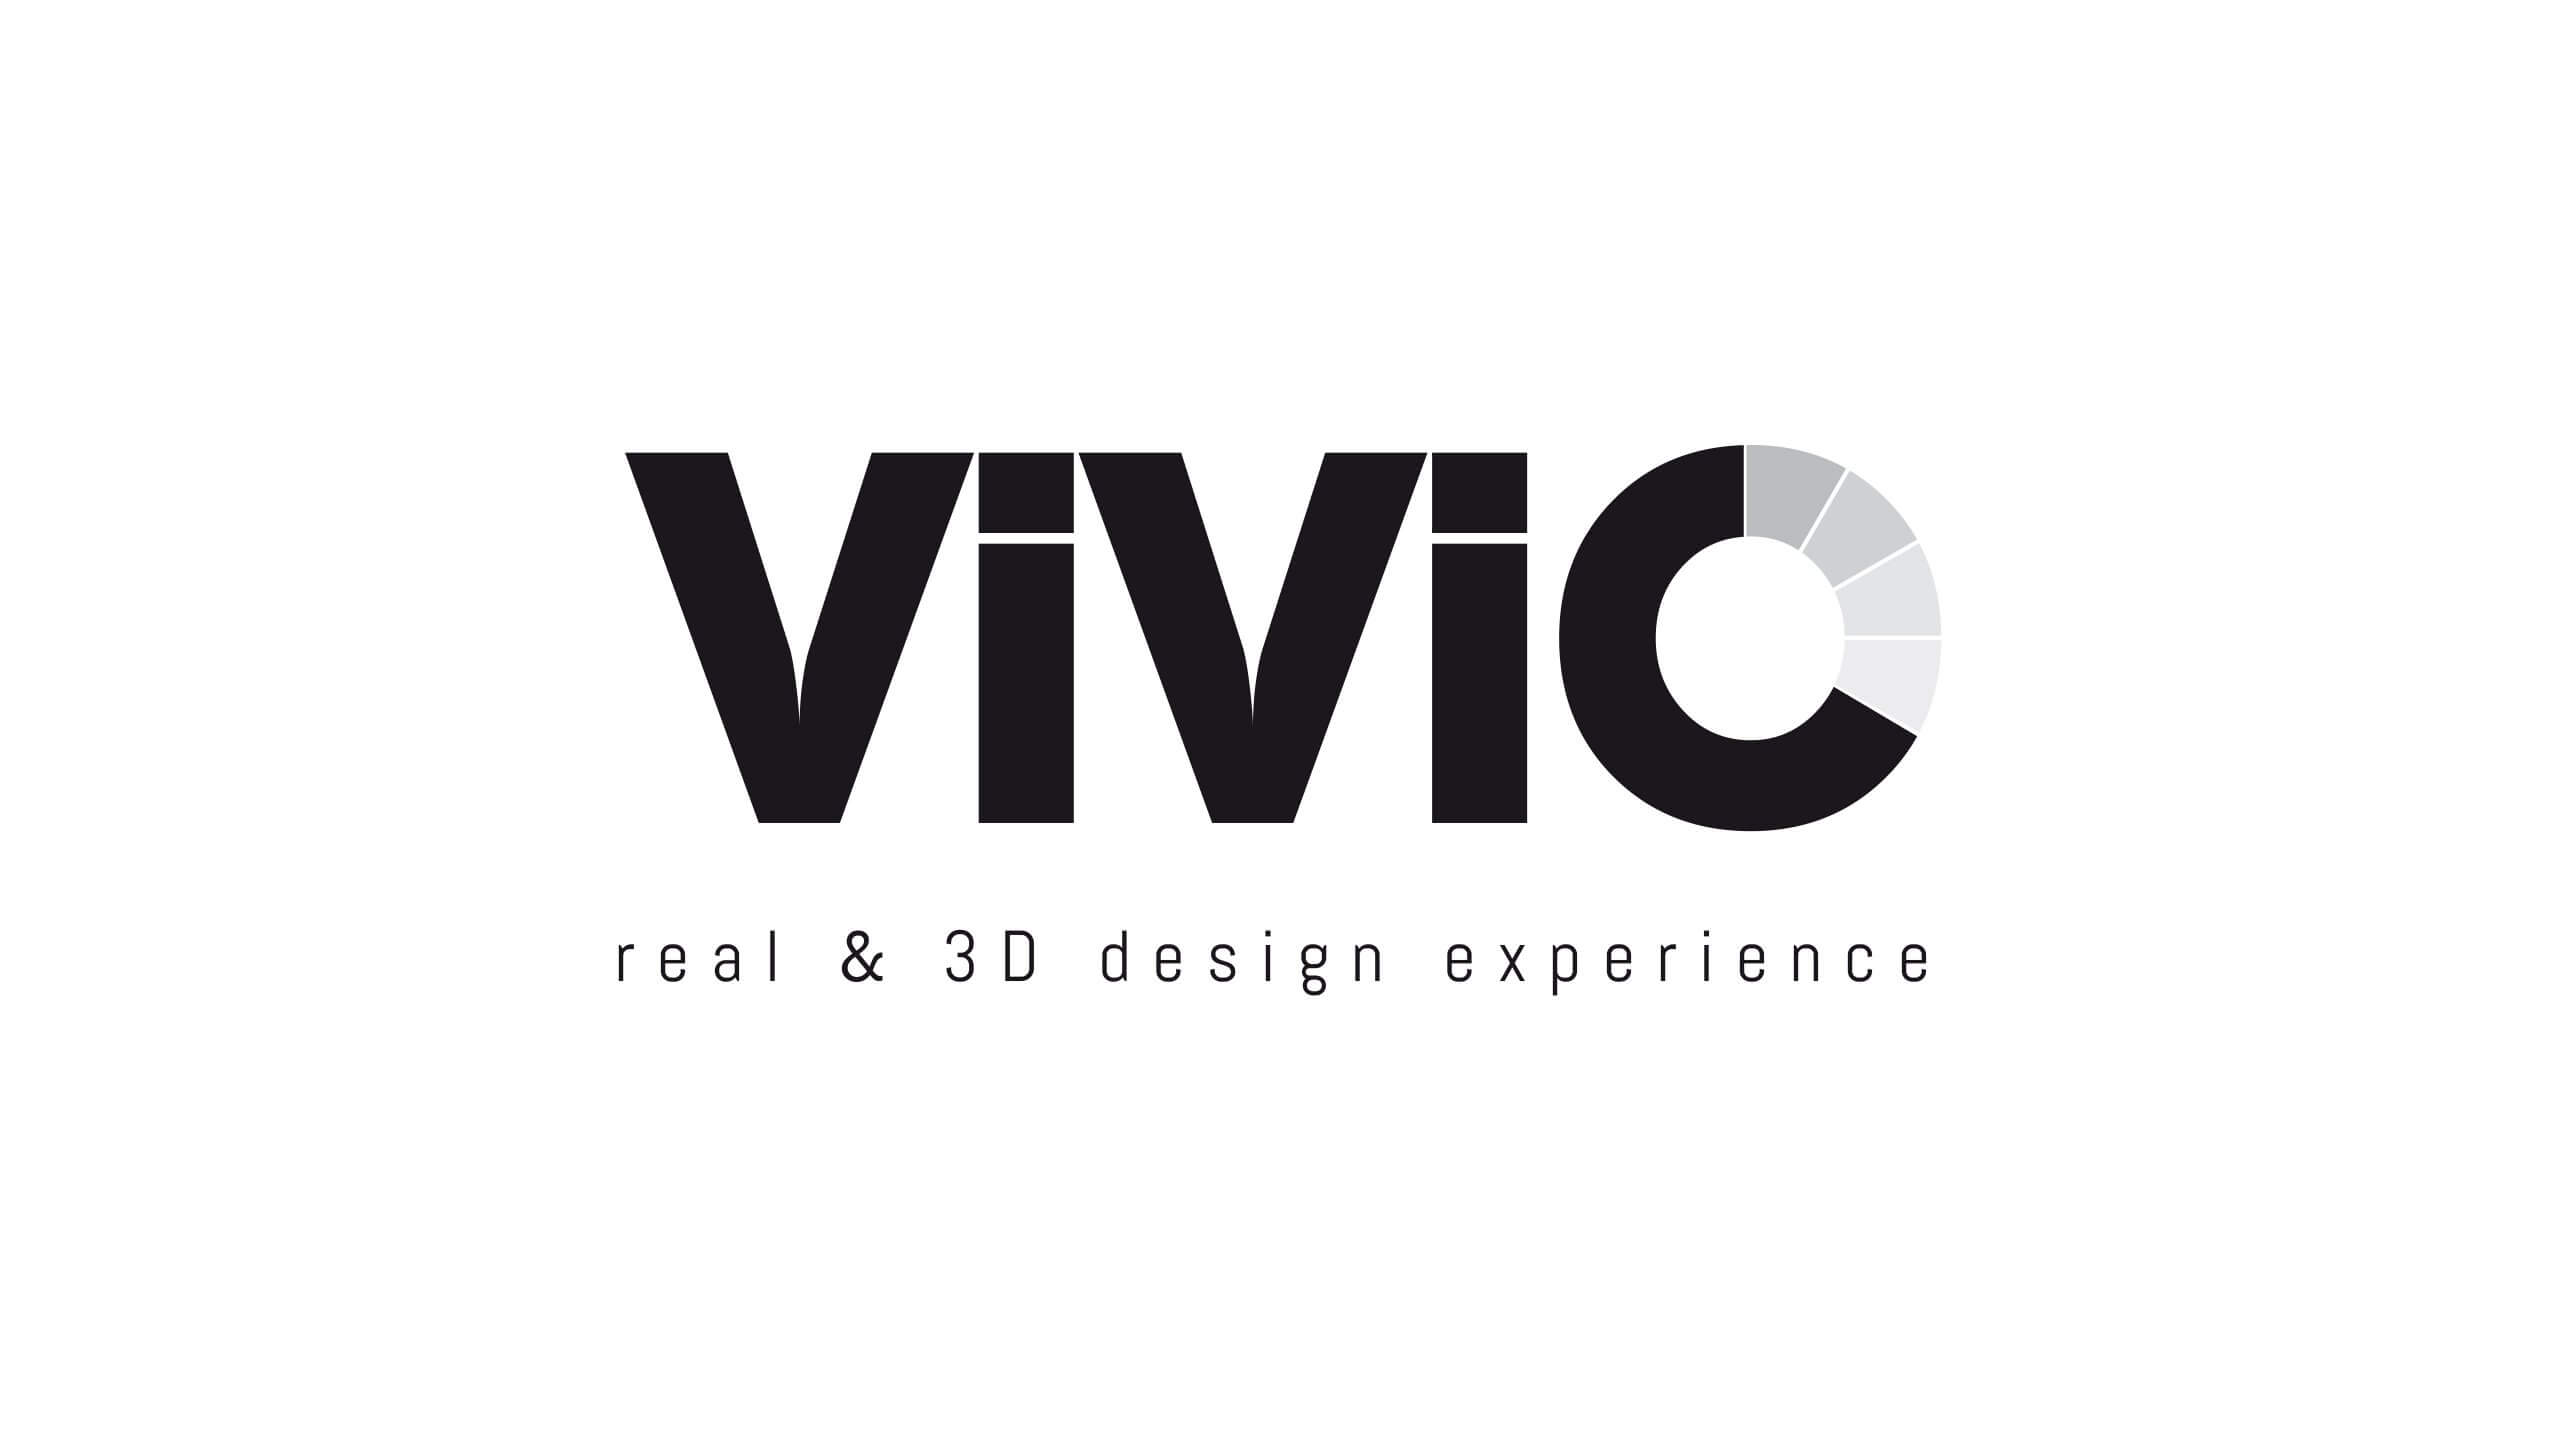 Real & 3D design experience